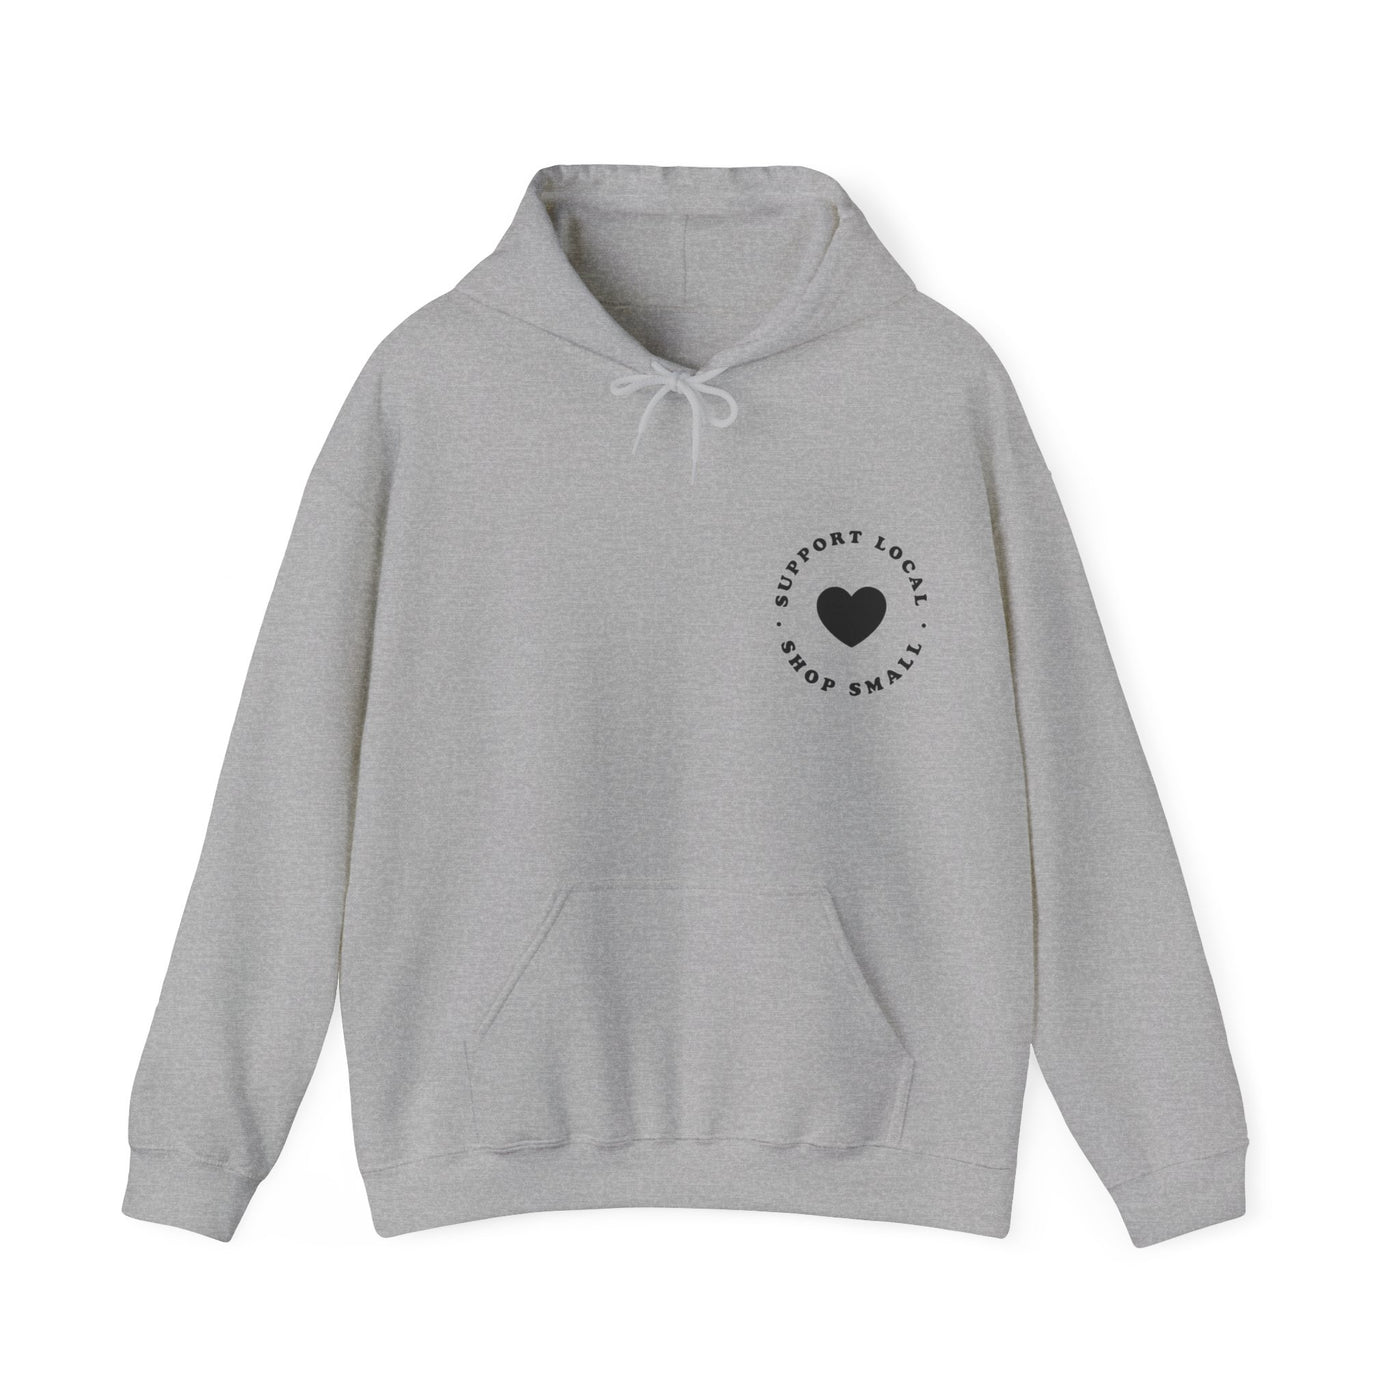 Support Local Shop Small Hooded Sweatshirt